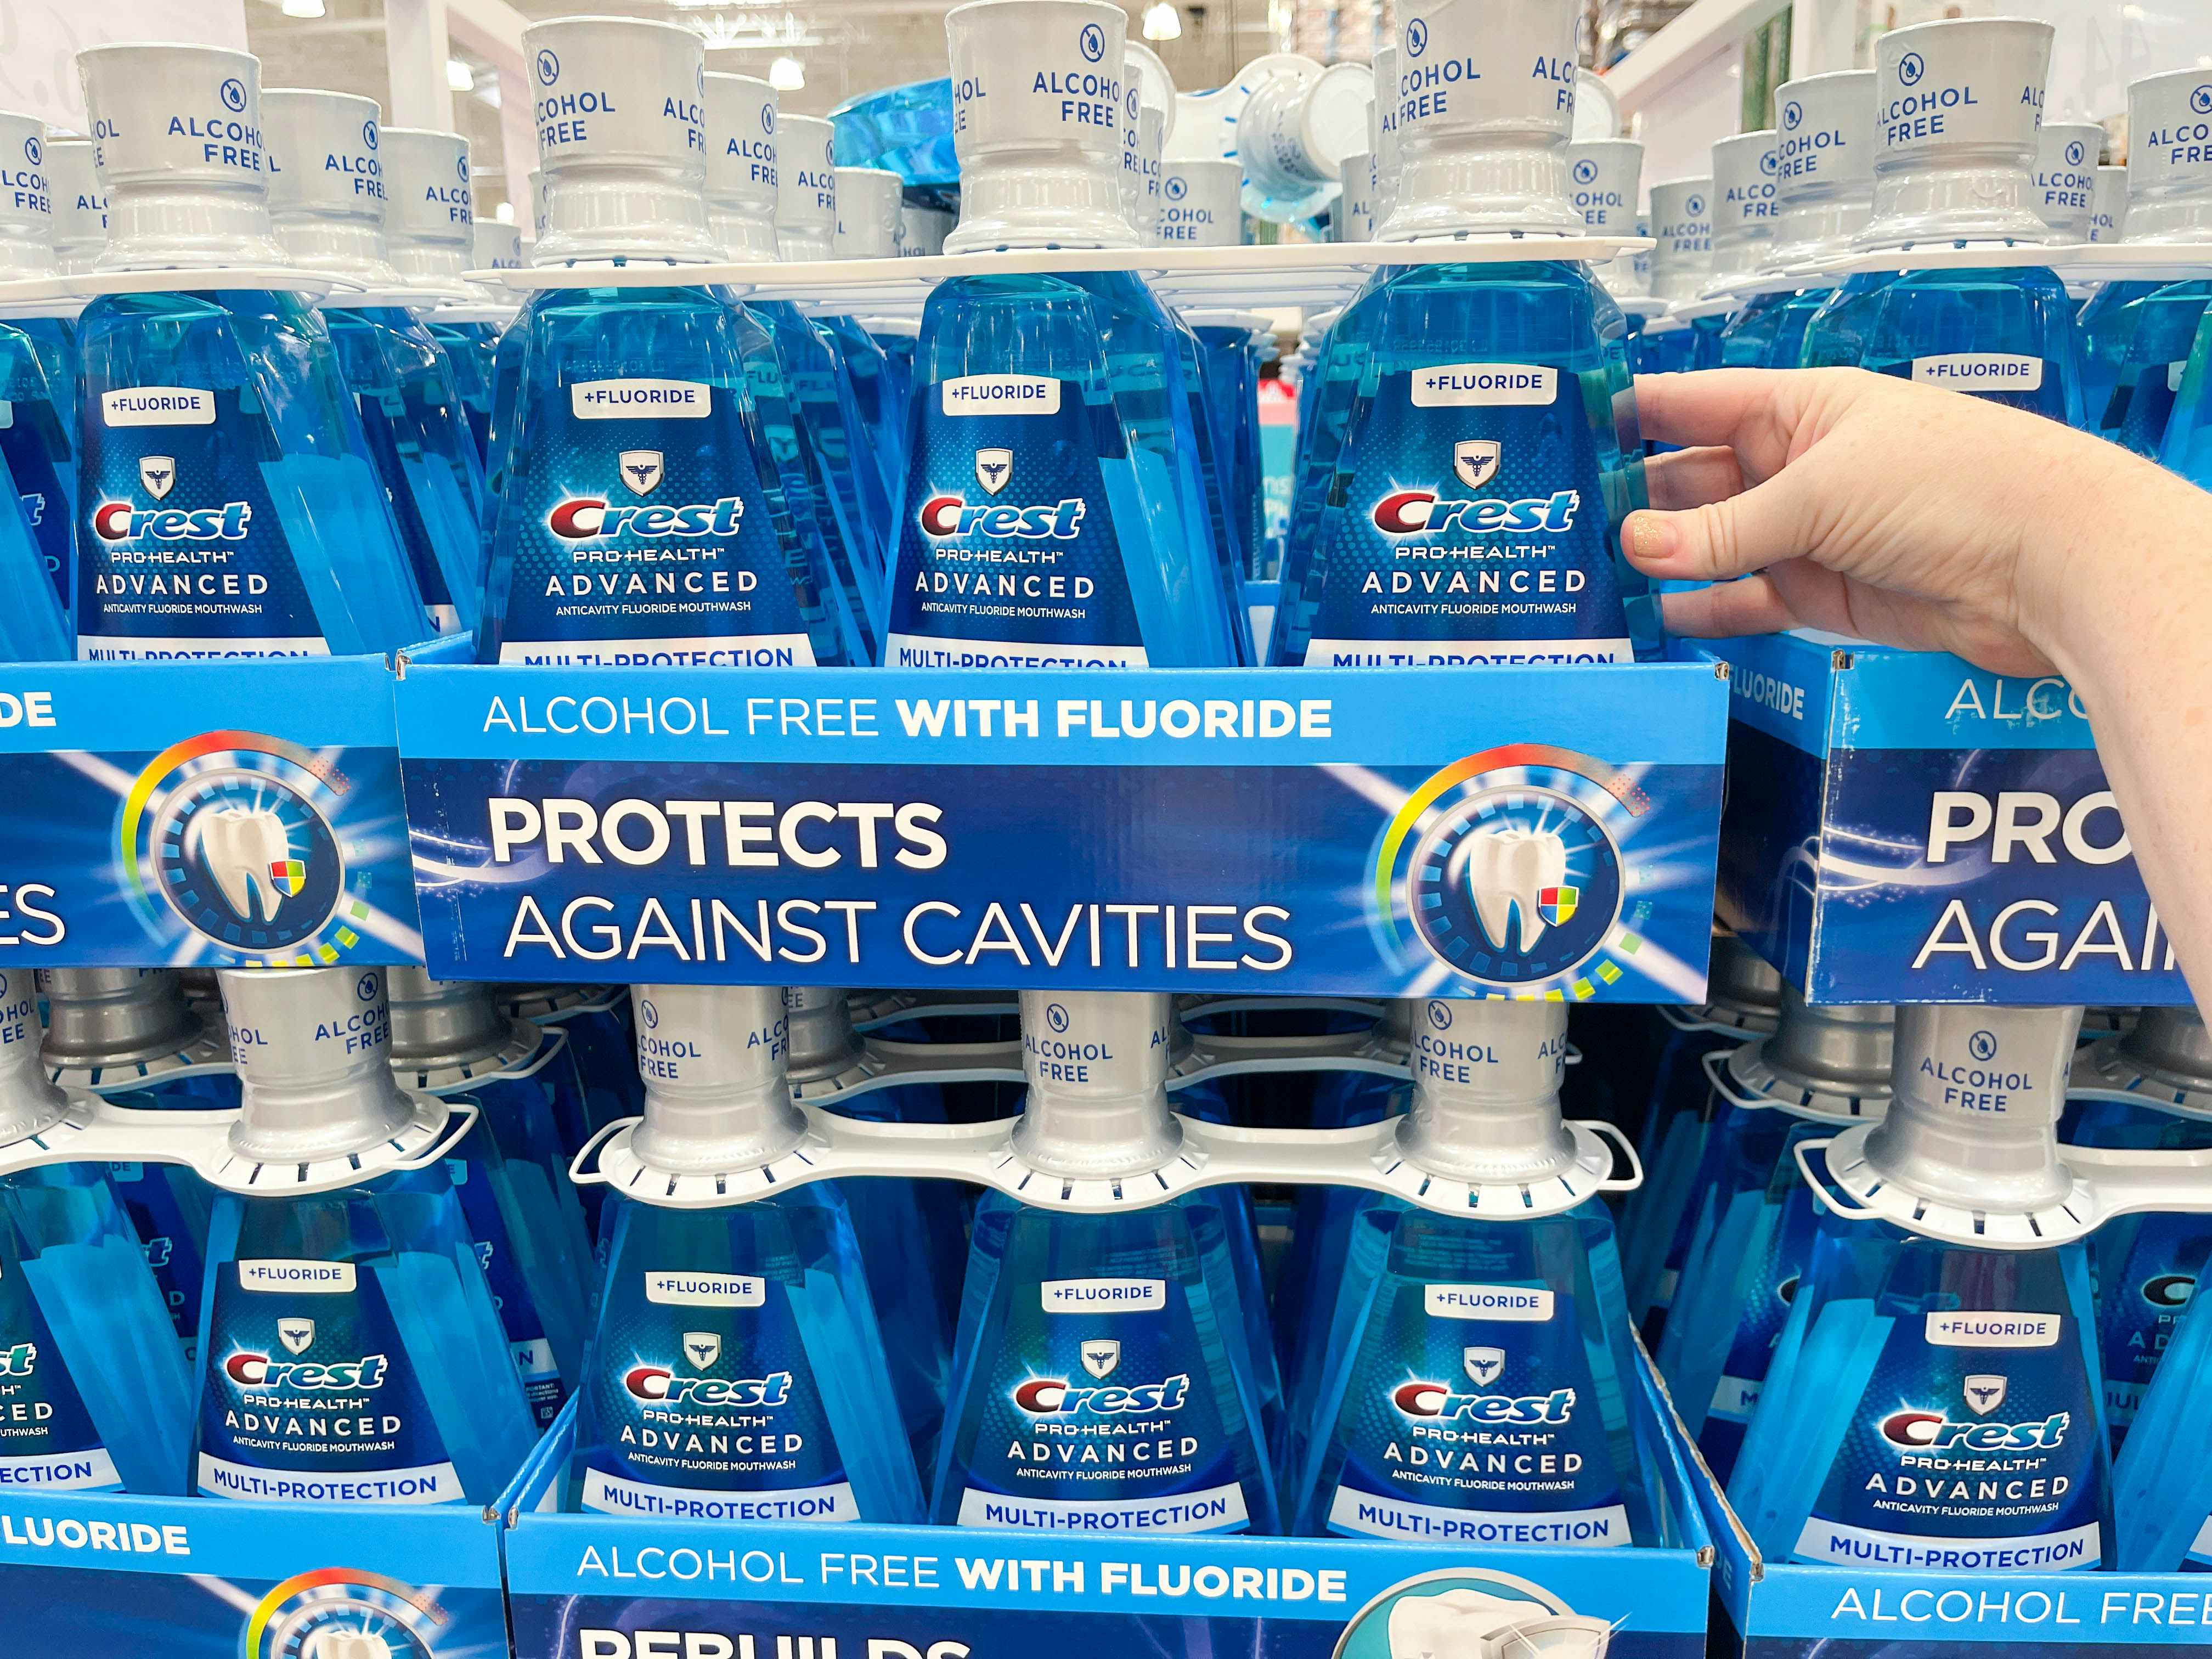 a person grabbing a bottle of crest moutwash in store